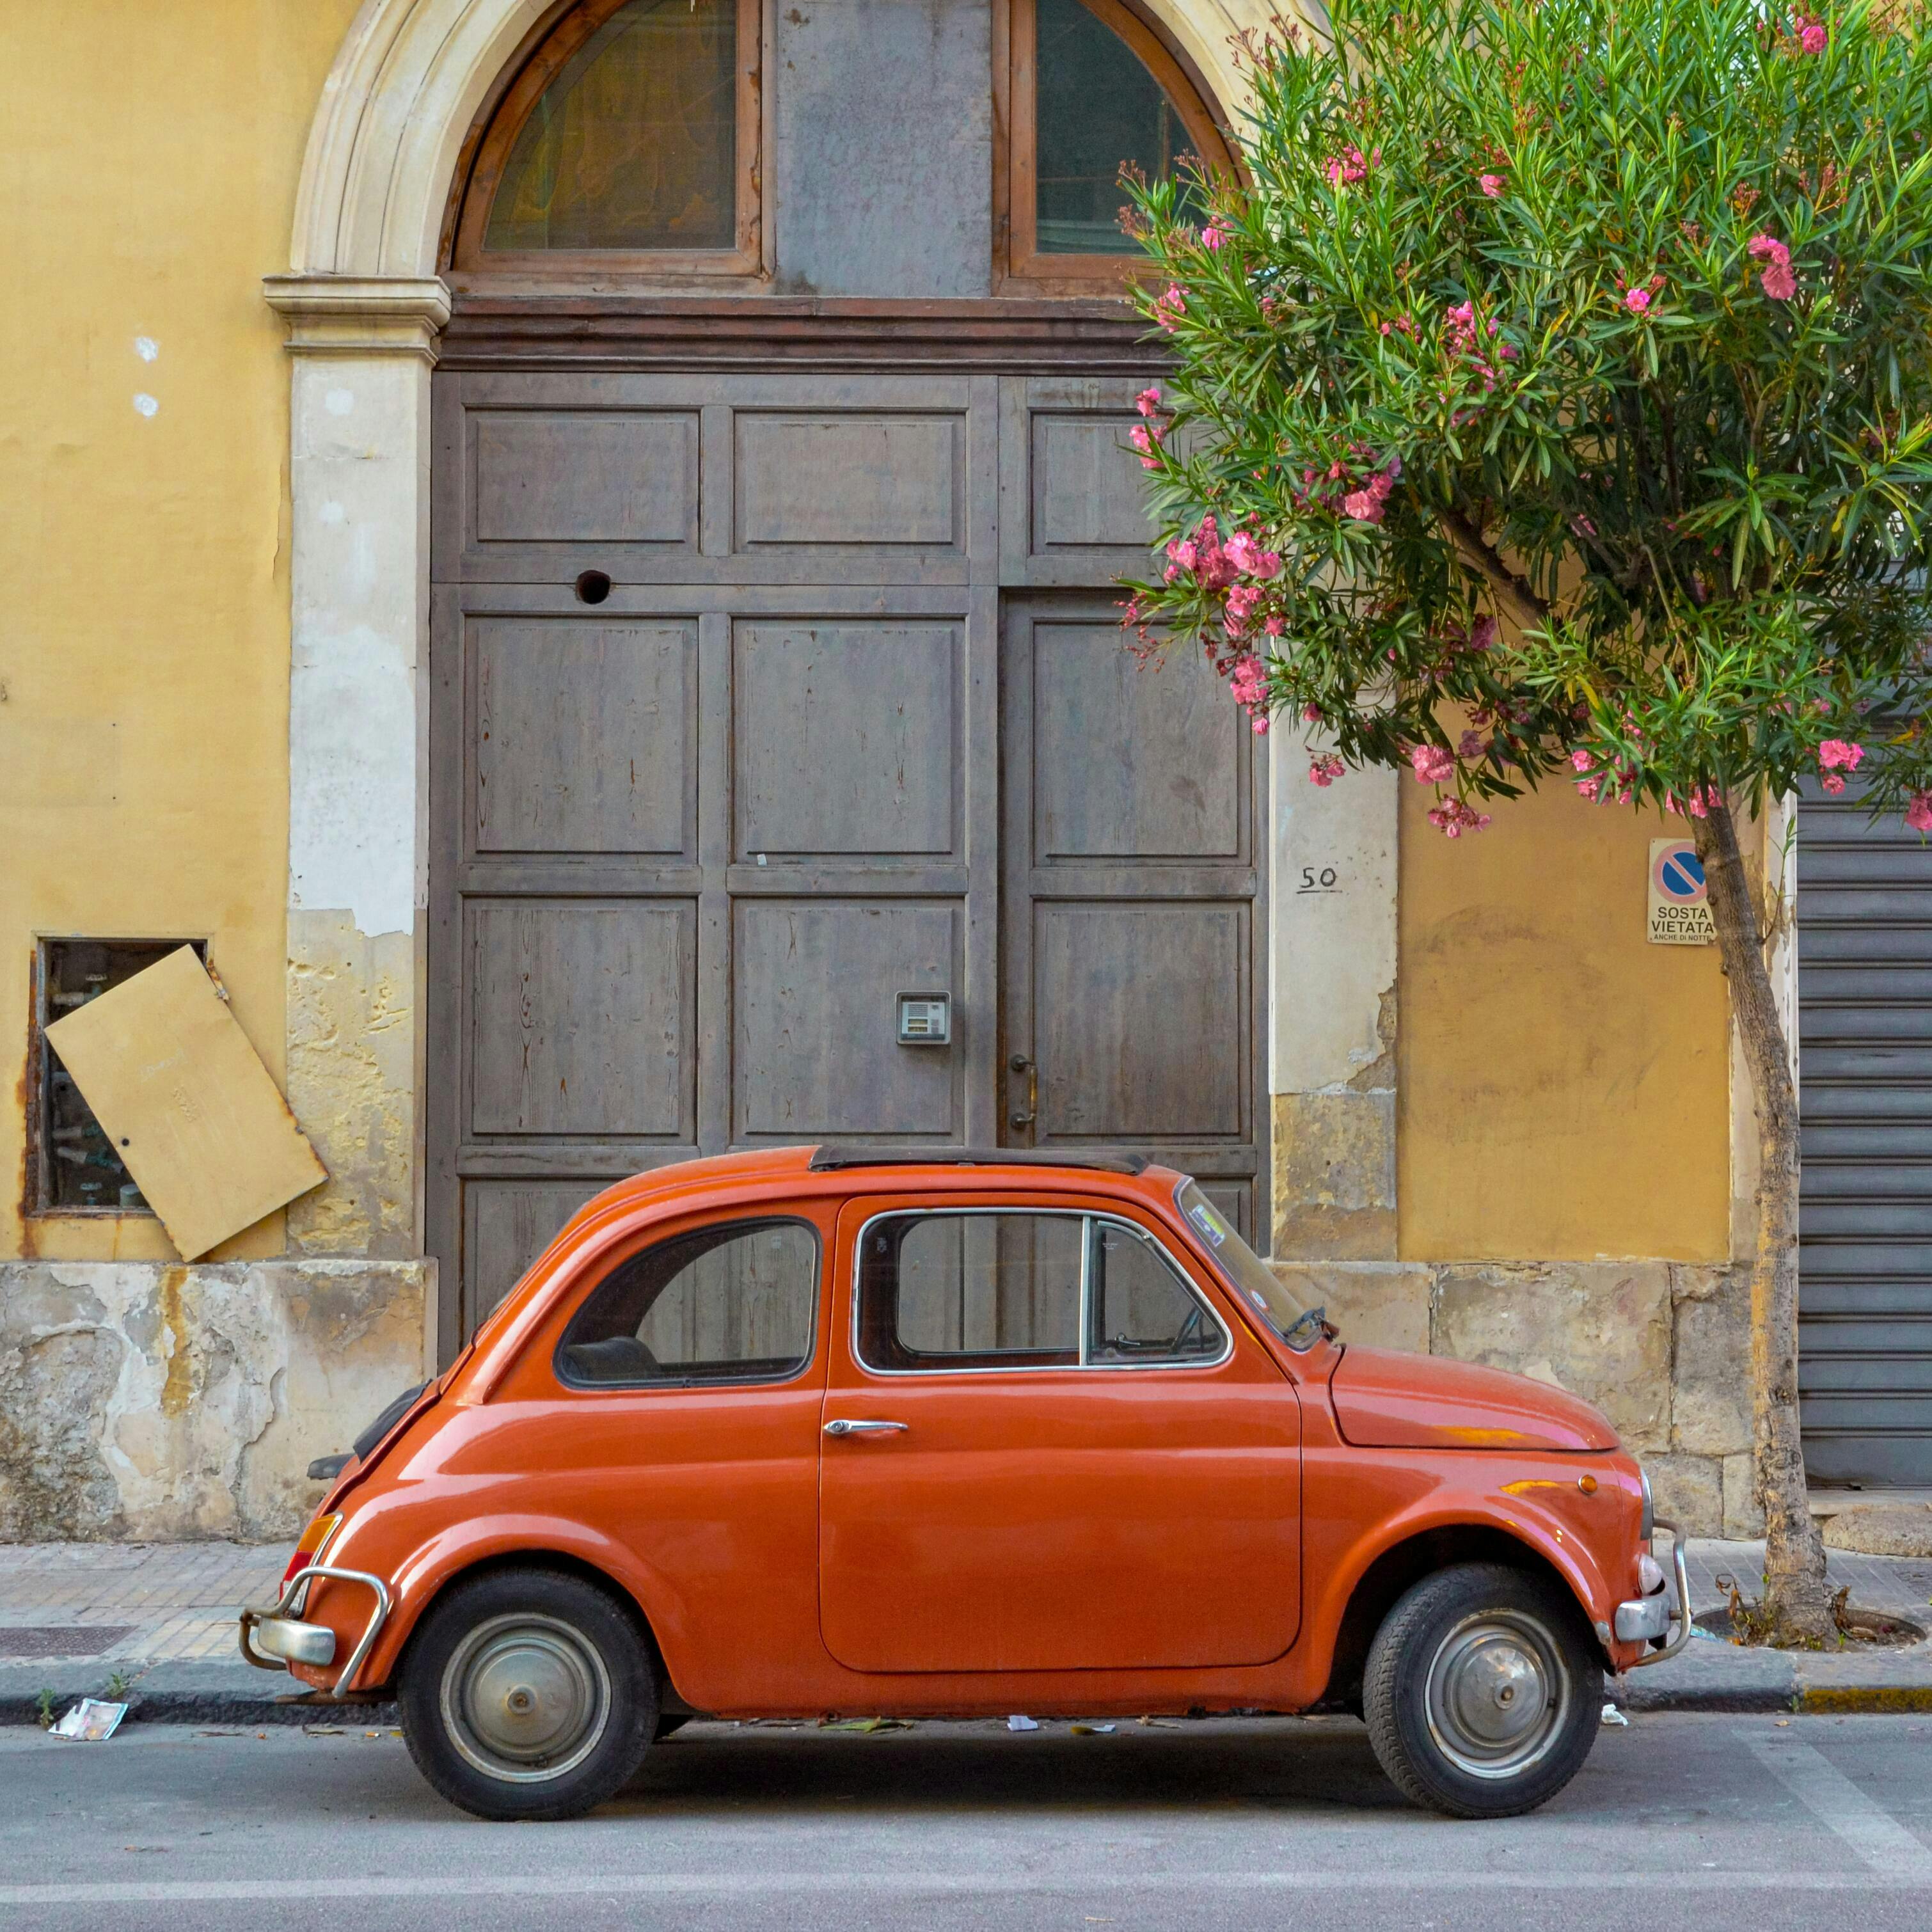 An orange Fiat 500 is parked side-on on an Italian street in front of large wooden doors. On the right hand side is a tree in bloom.